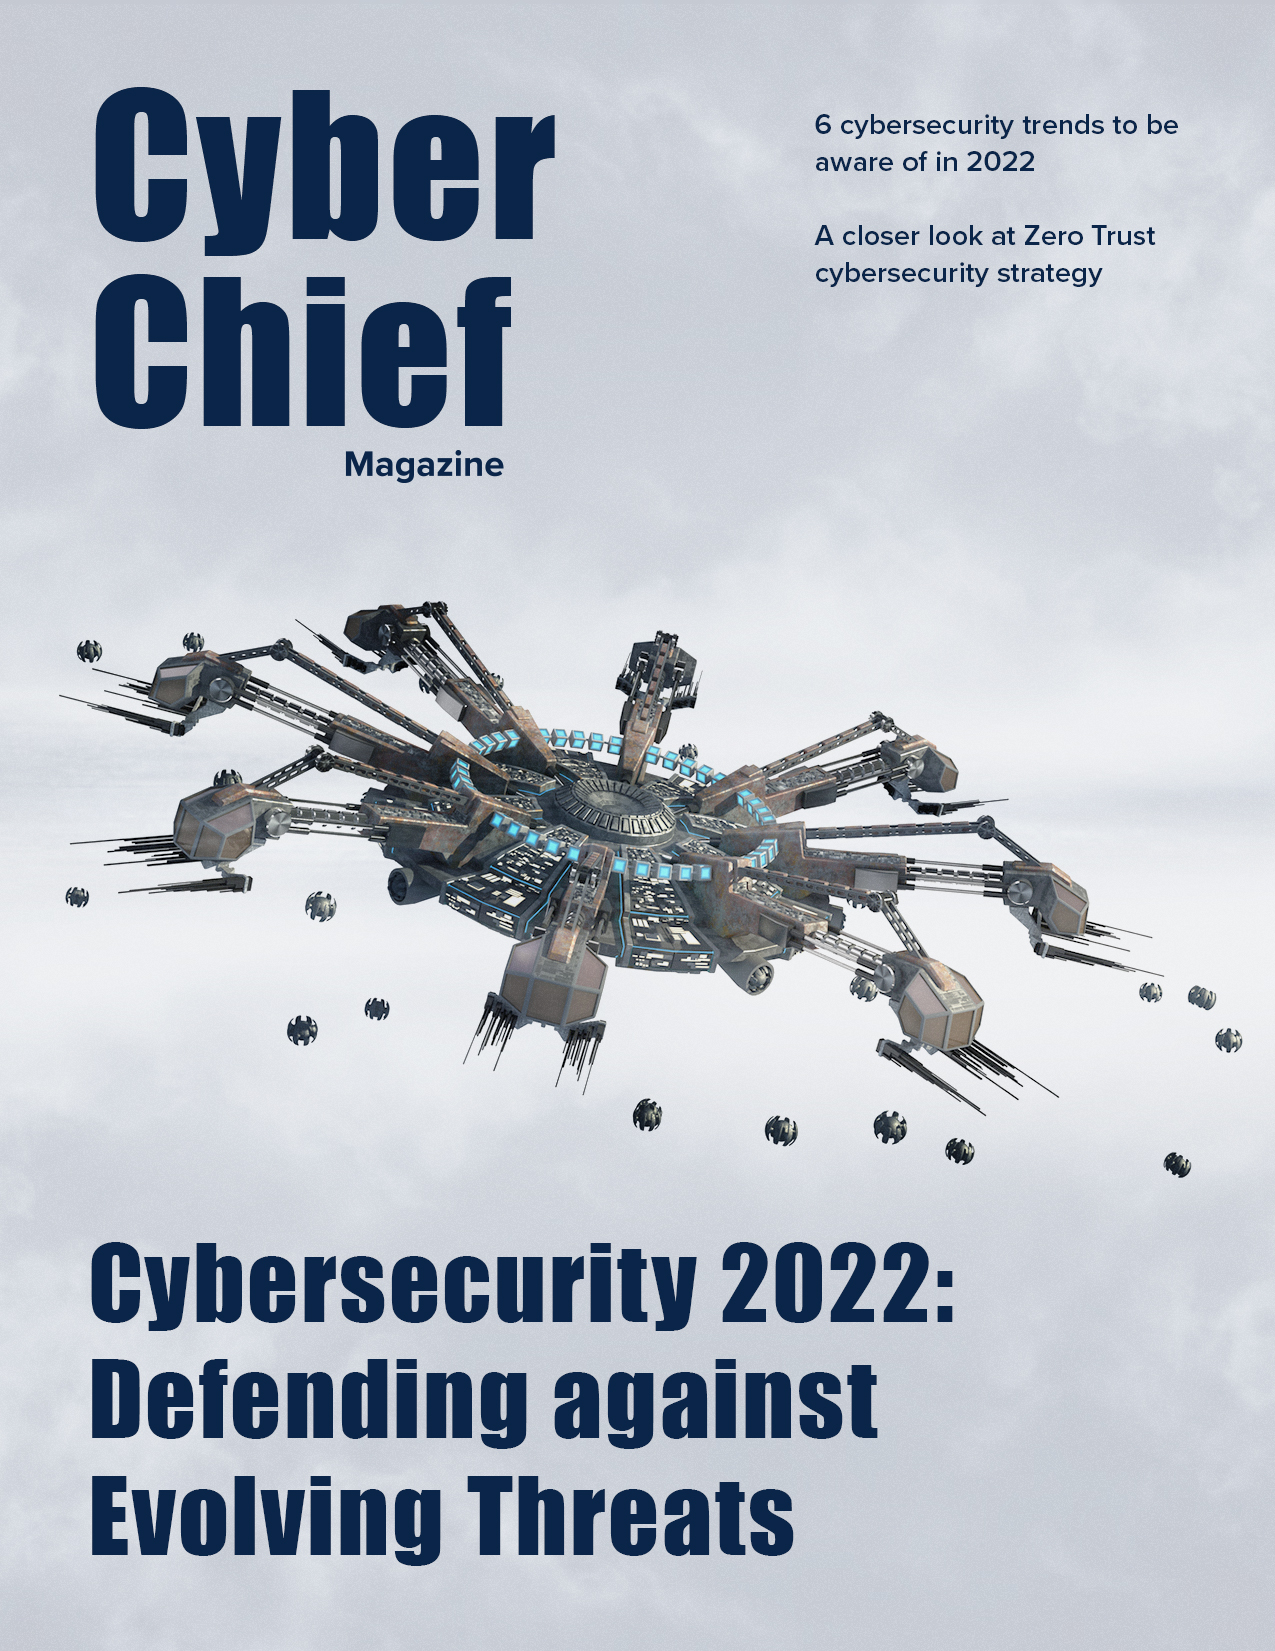 Cybersecurity 2022: Defending against Evolving Threats